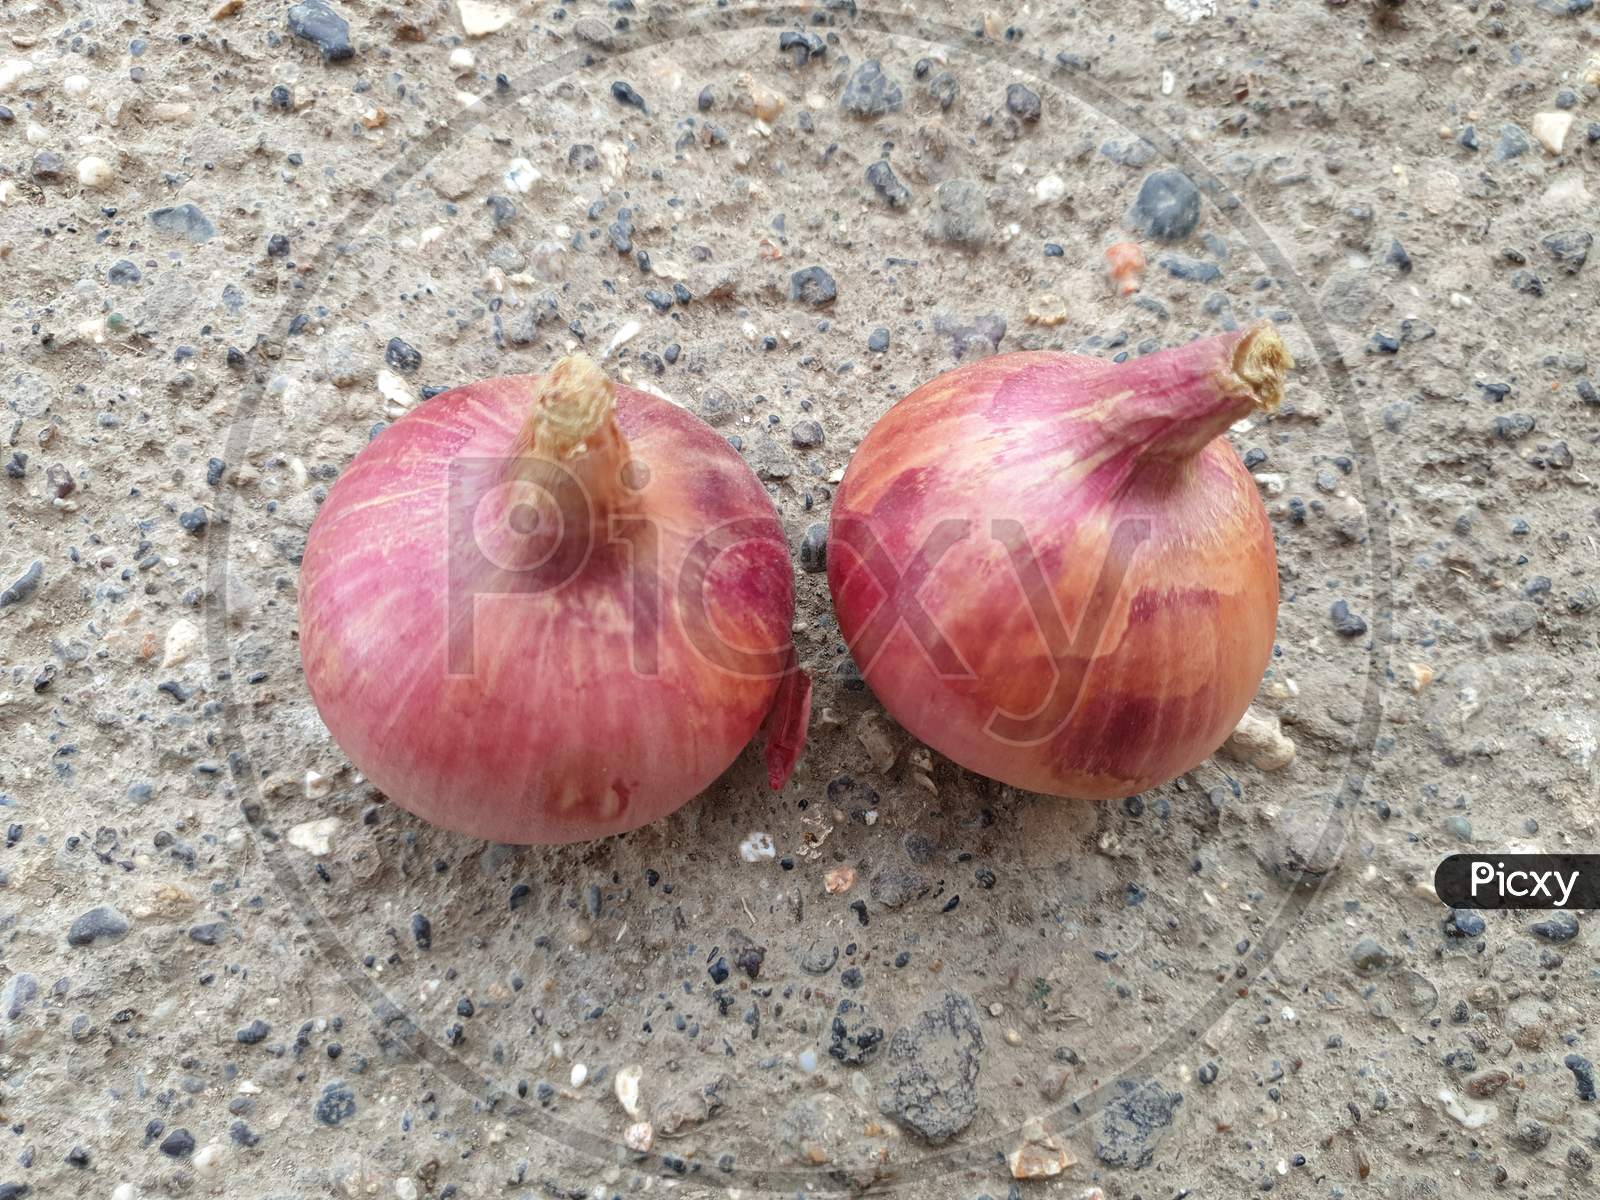 This is an onion